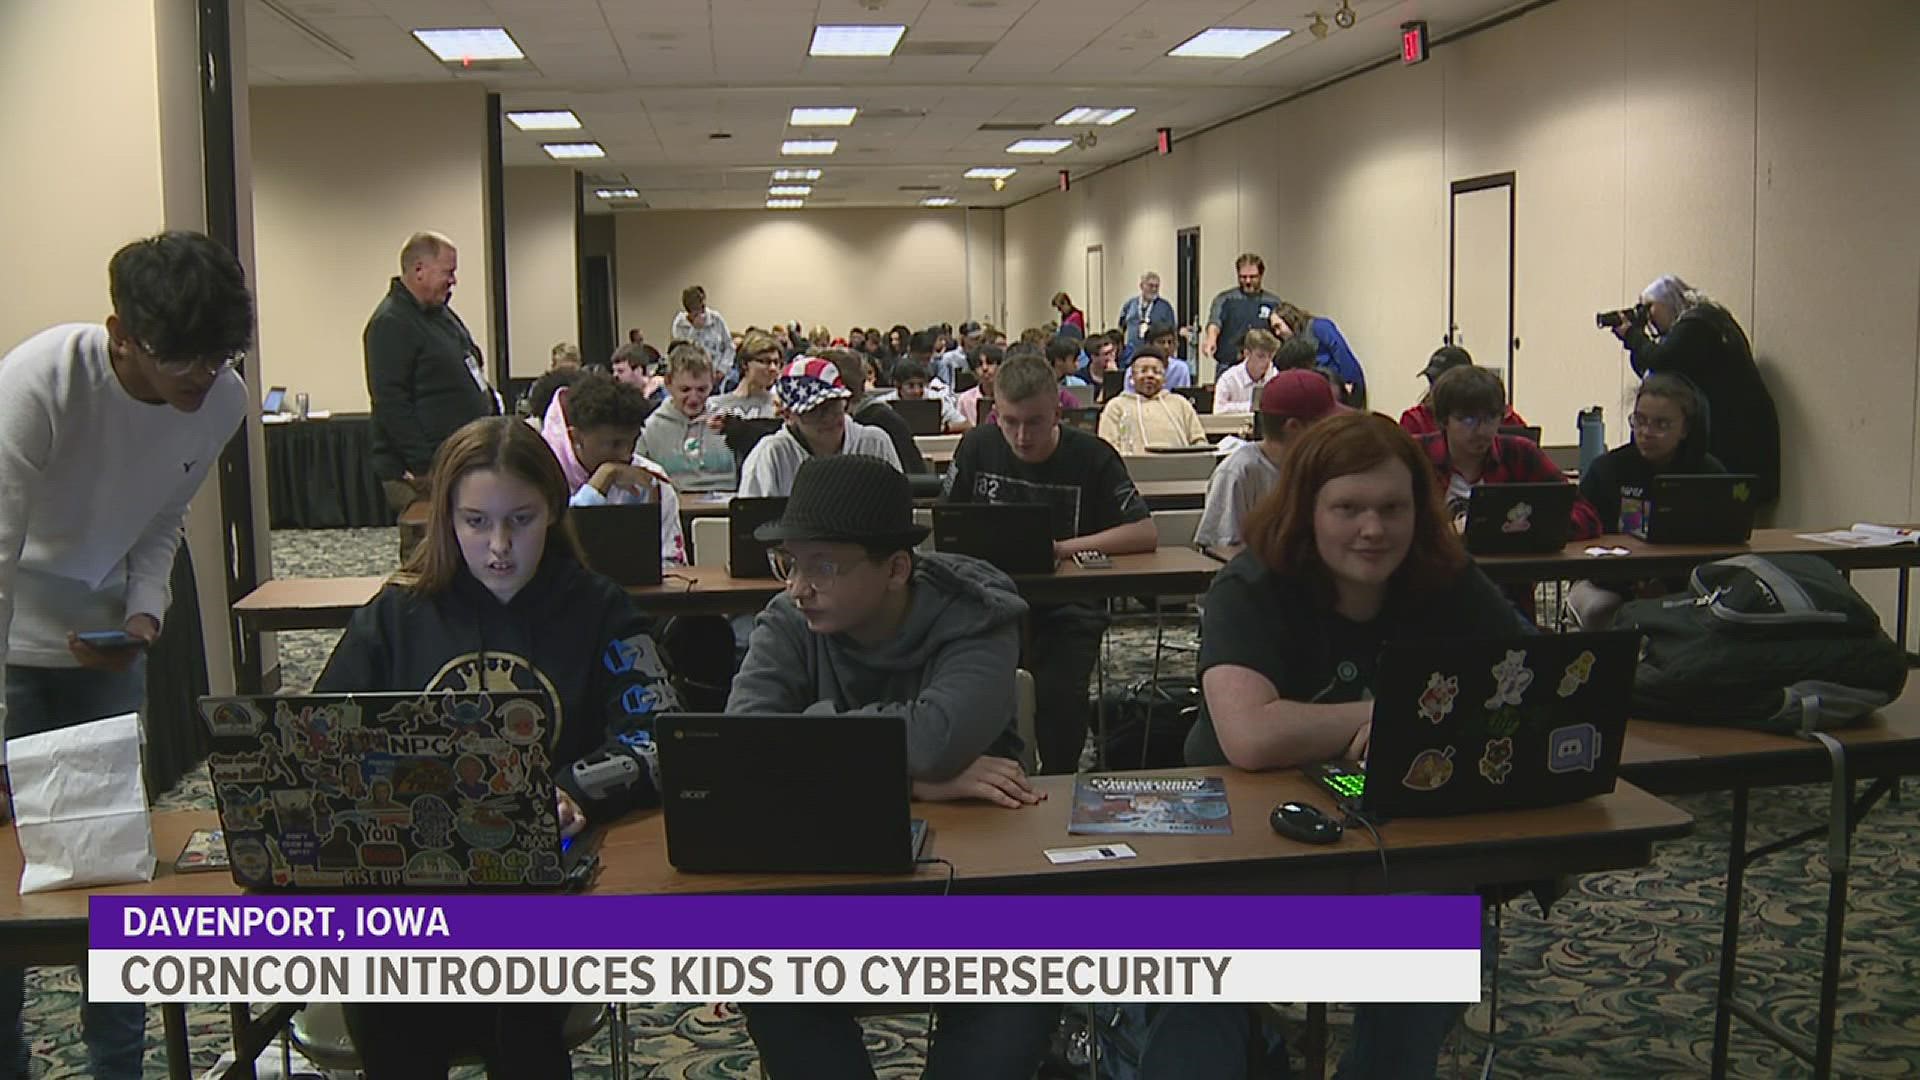 The event included a capture-the-flag cybersecurity exercise, a career fair, a scavenger hunt and other activities.